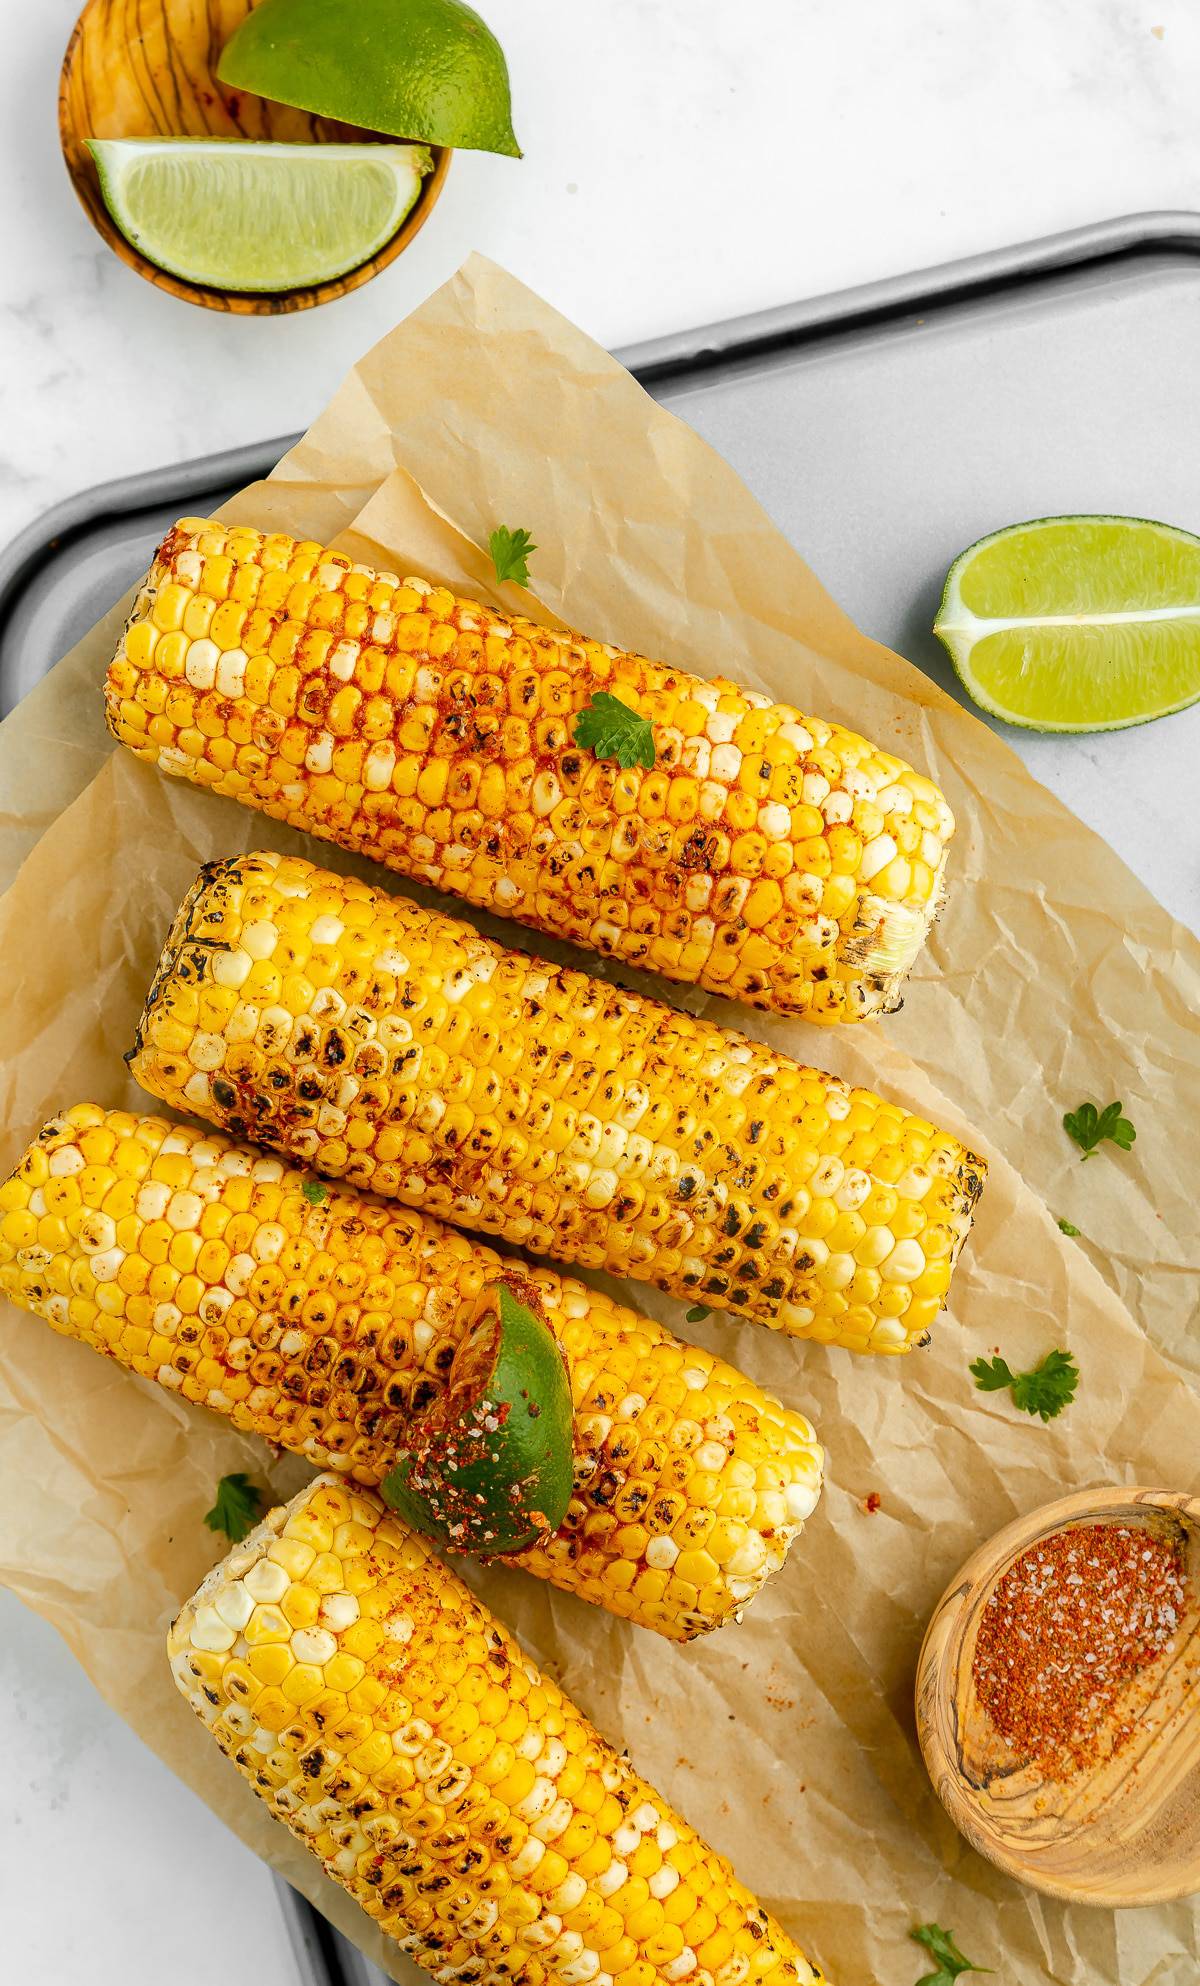 Grilled indian street corn on the cob, served with lime wedges.